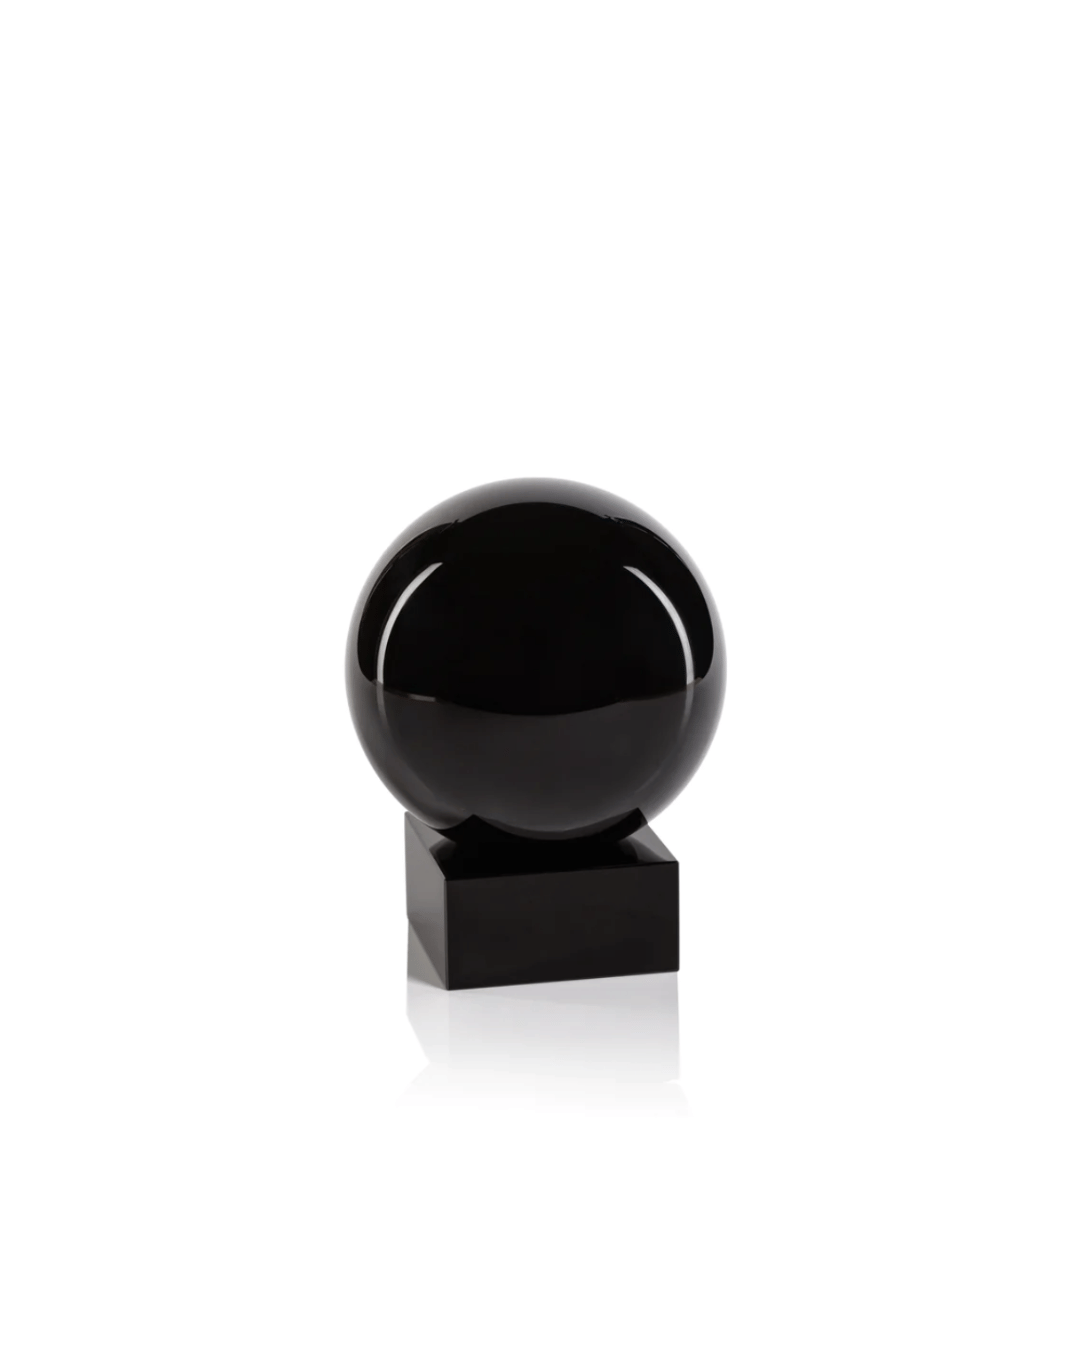 A Zodax Crystal Orb on Base sitting atop a black cubic pedestal, presented against a clean white background in a Scottsdale, Arizona bungalow.